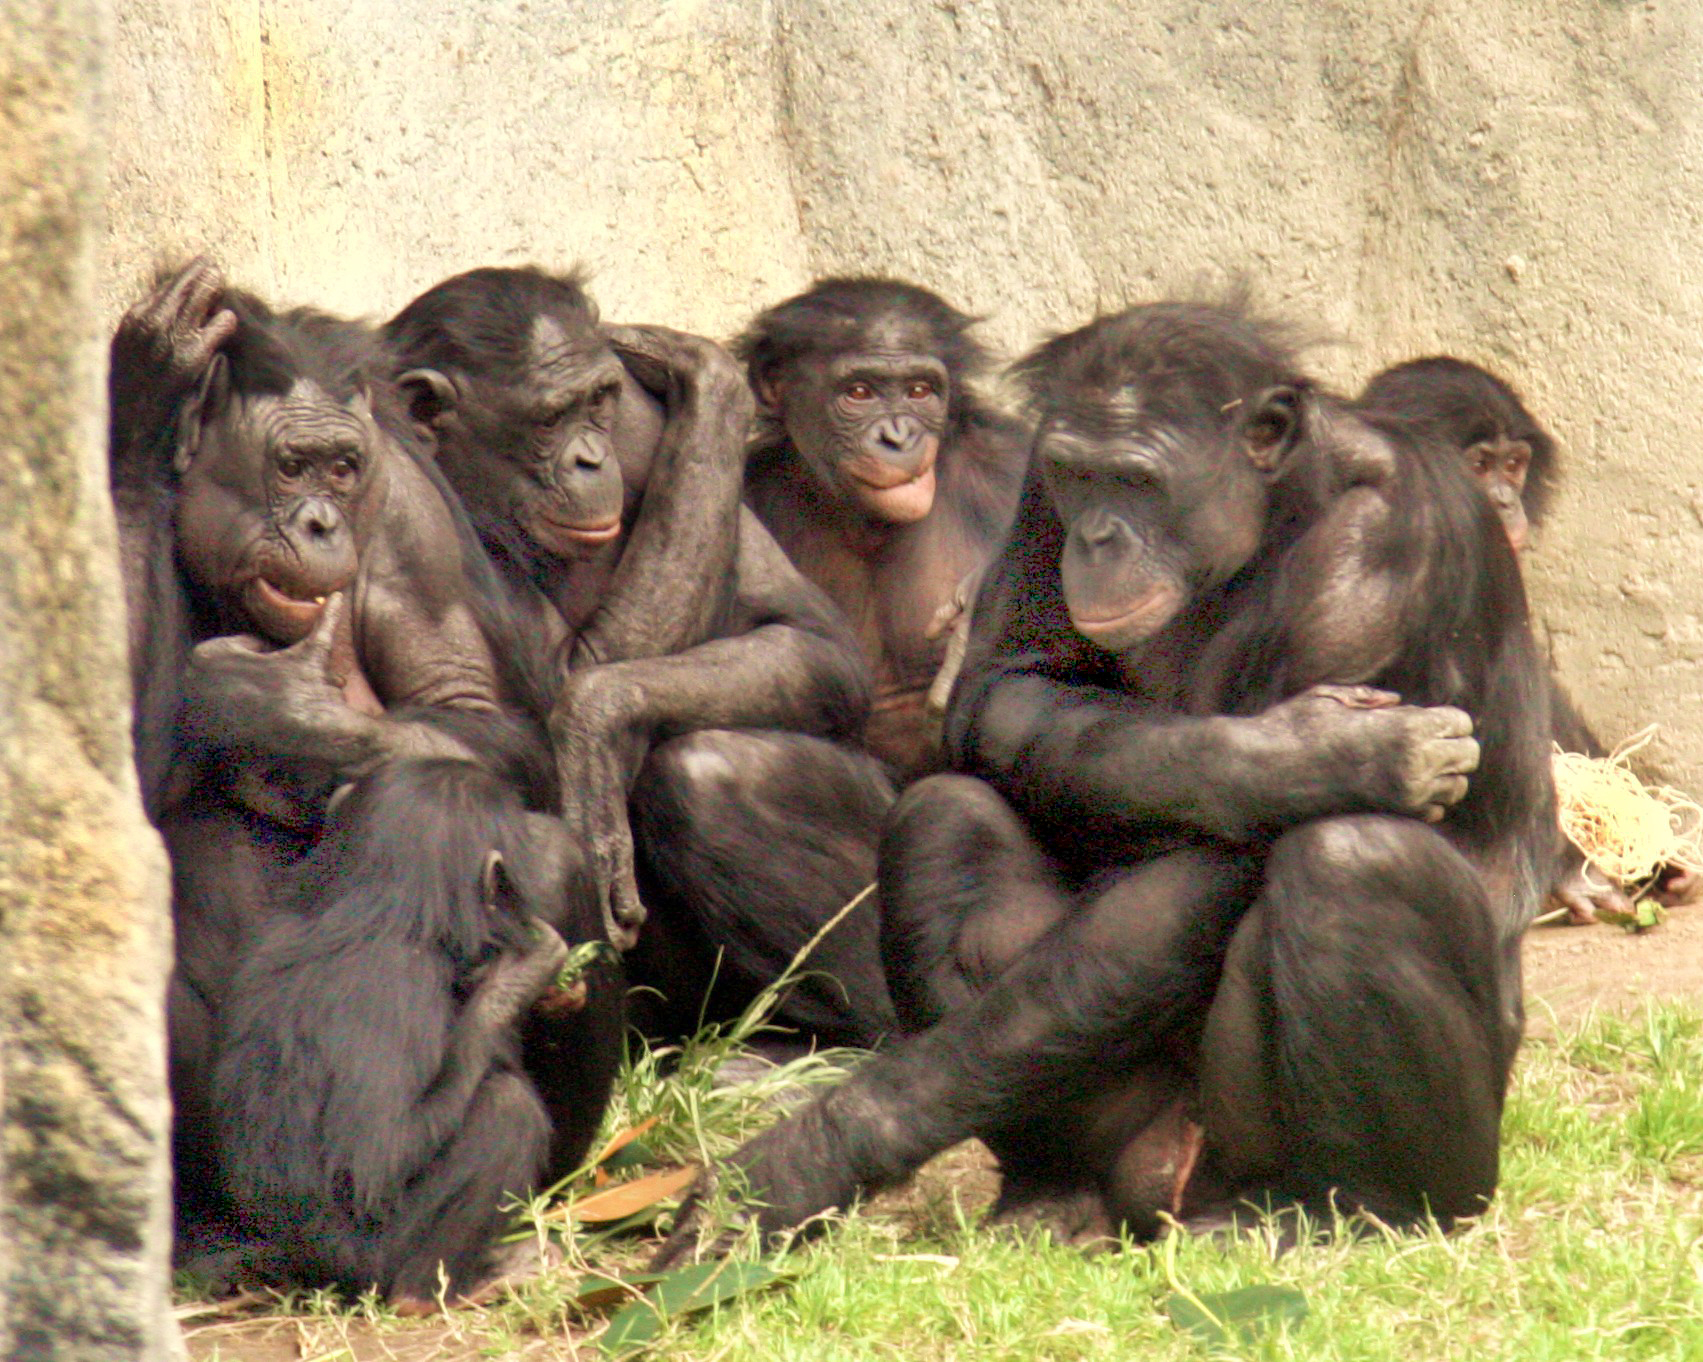 Can Other Primates Learn Human Languages?